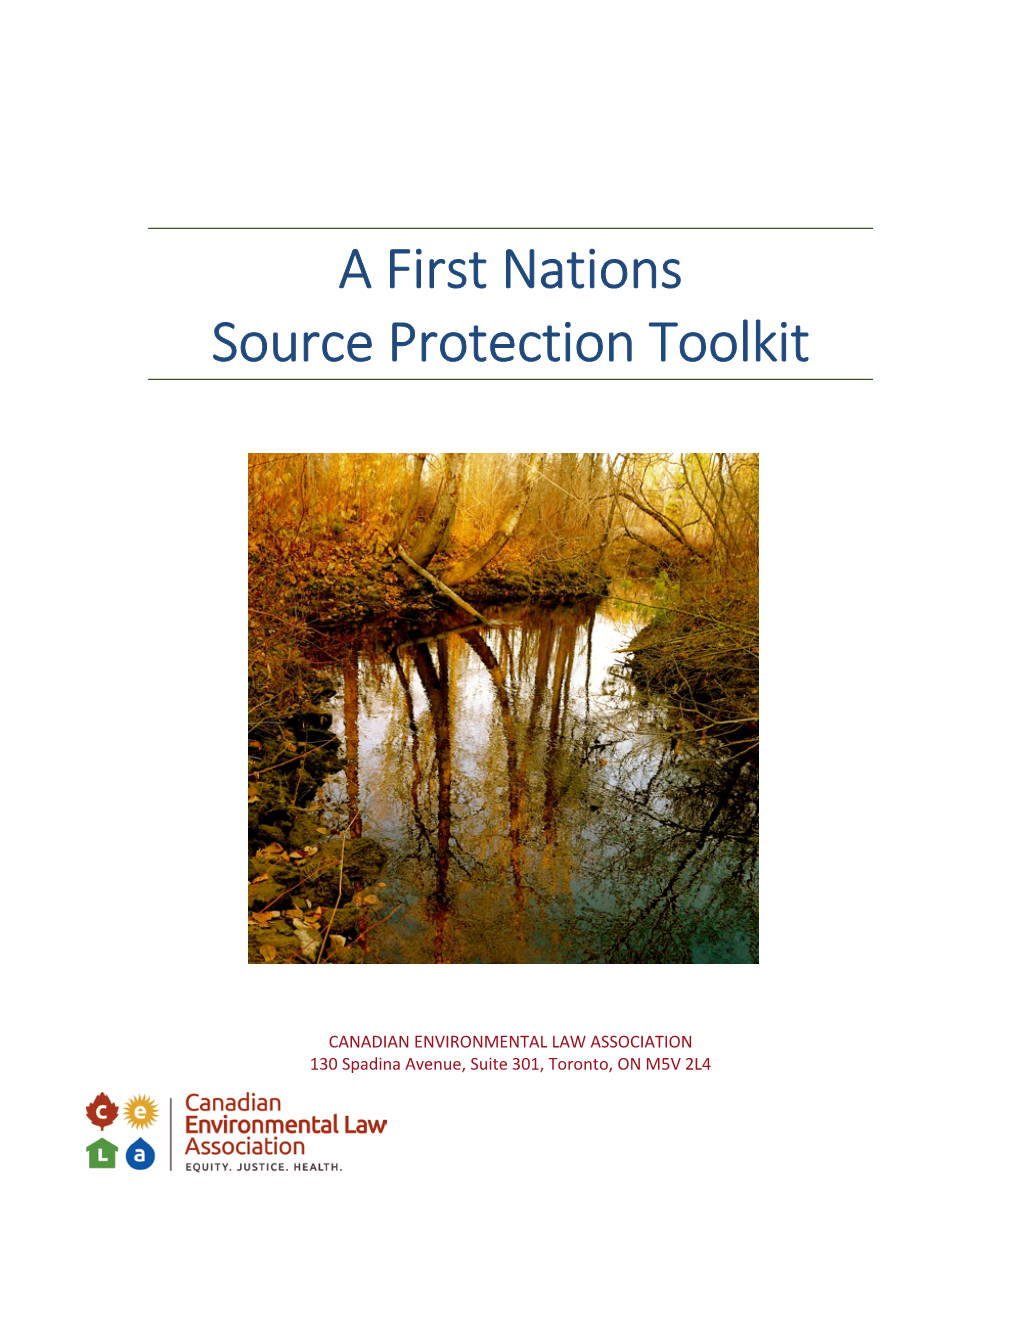 A First Nations Source Protection Toolkit